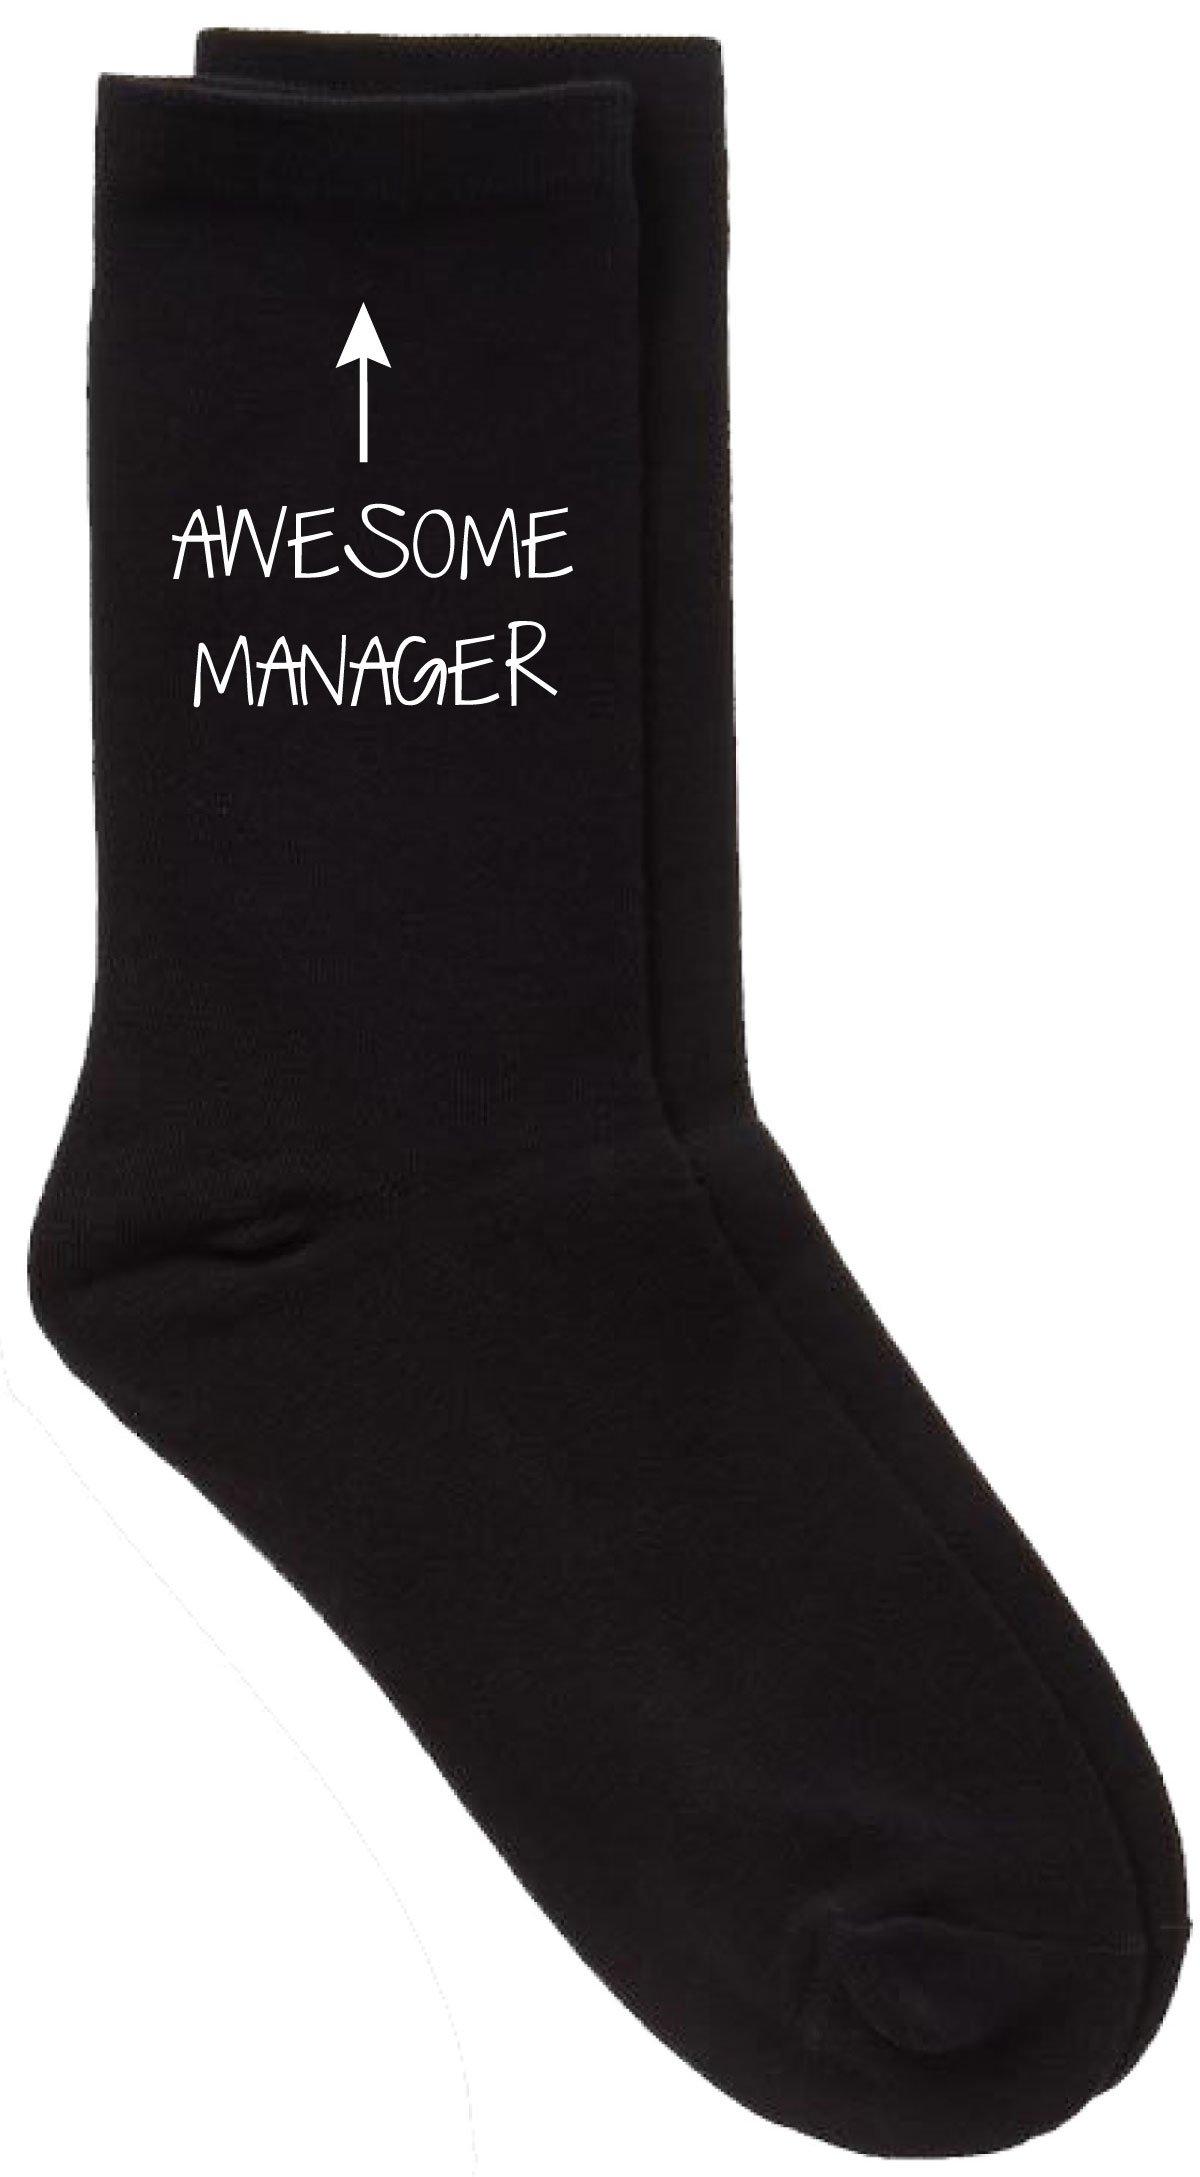 Awesome Manager Black Calf Socks